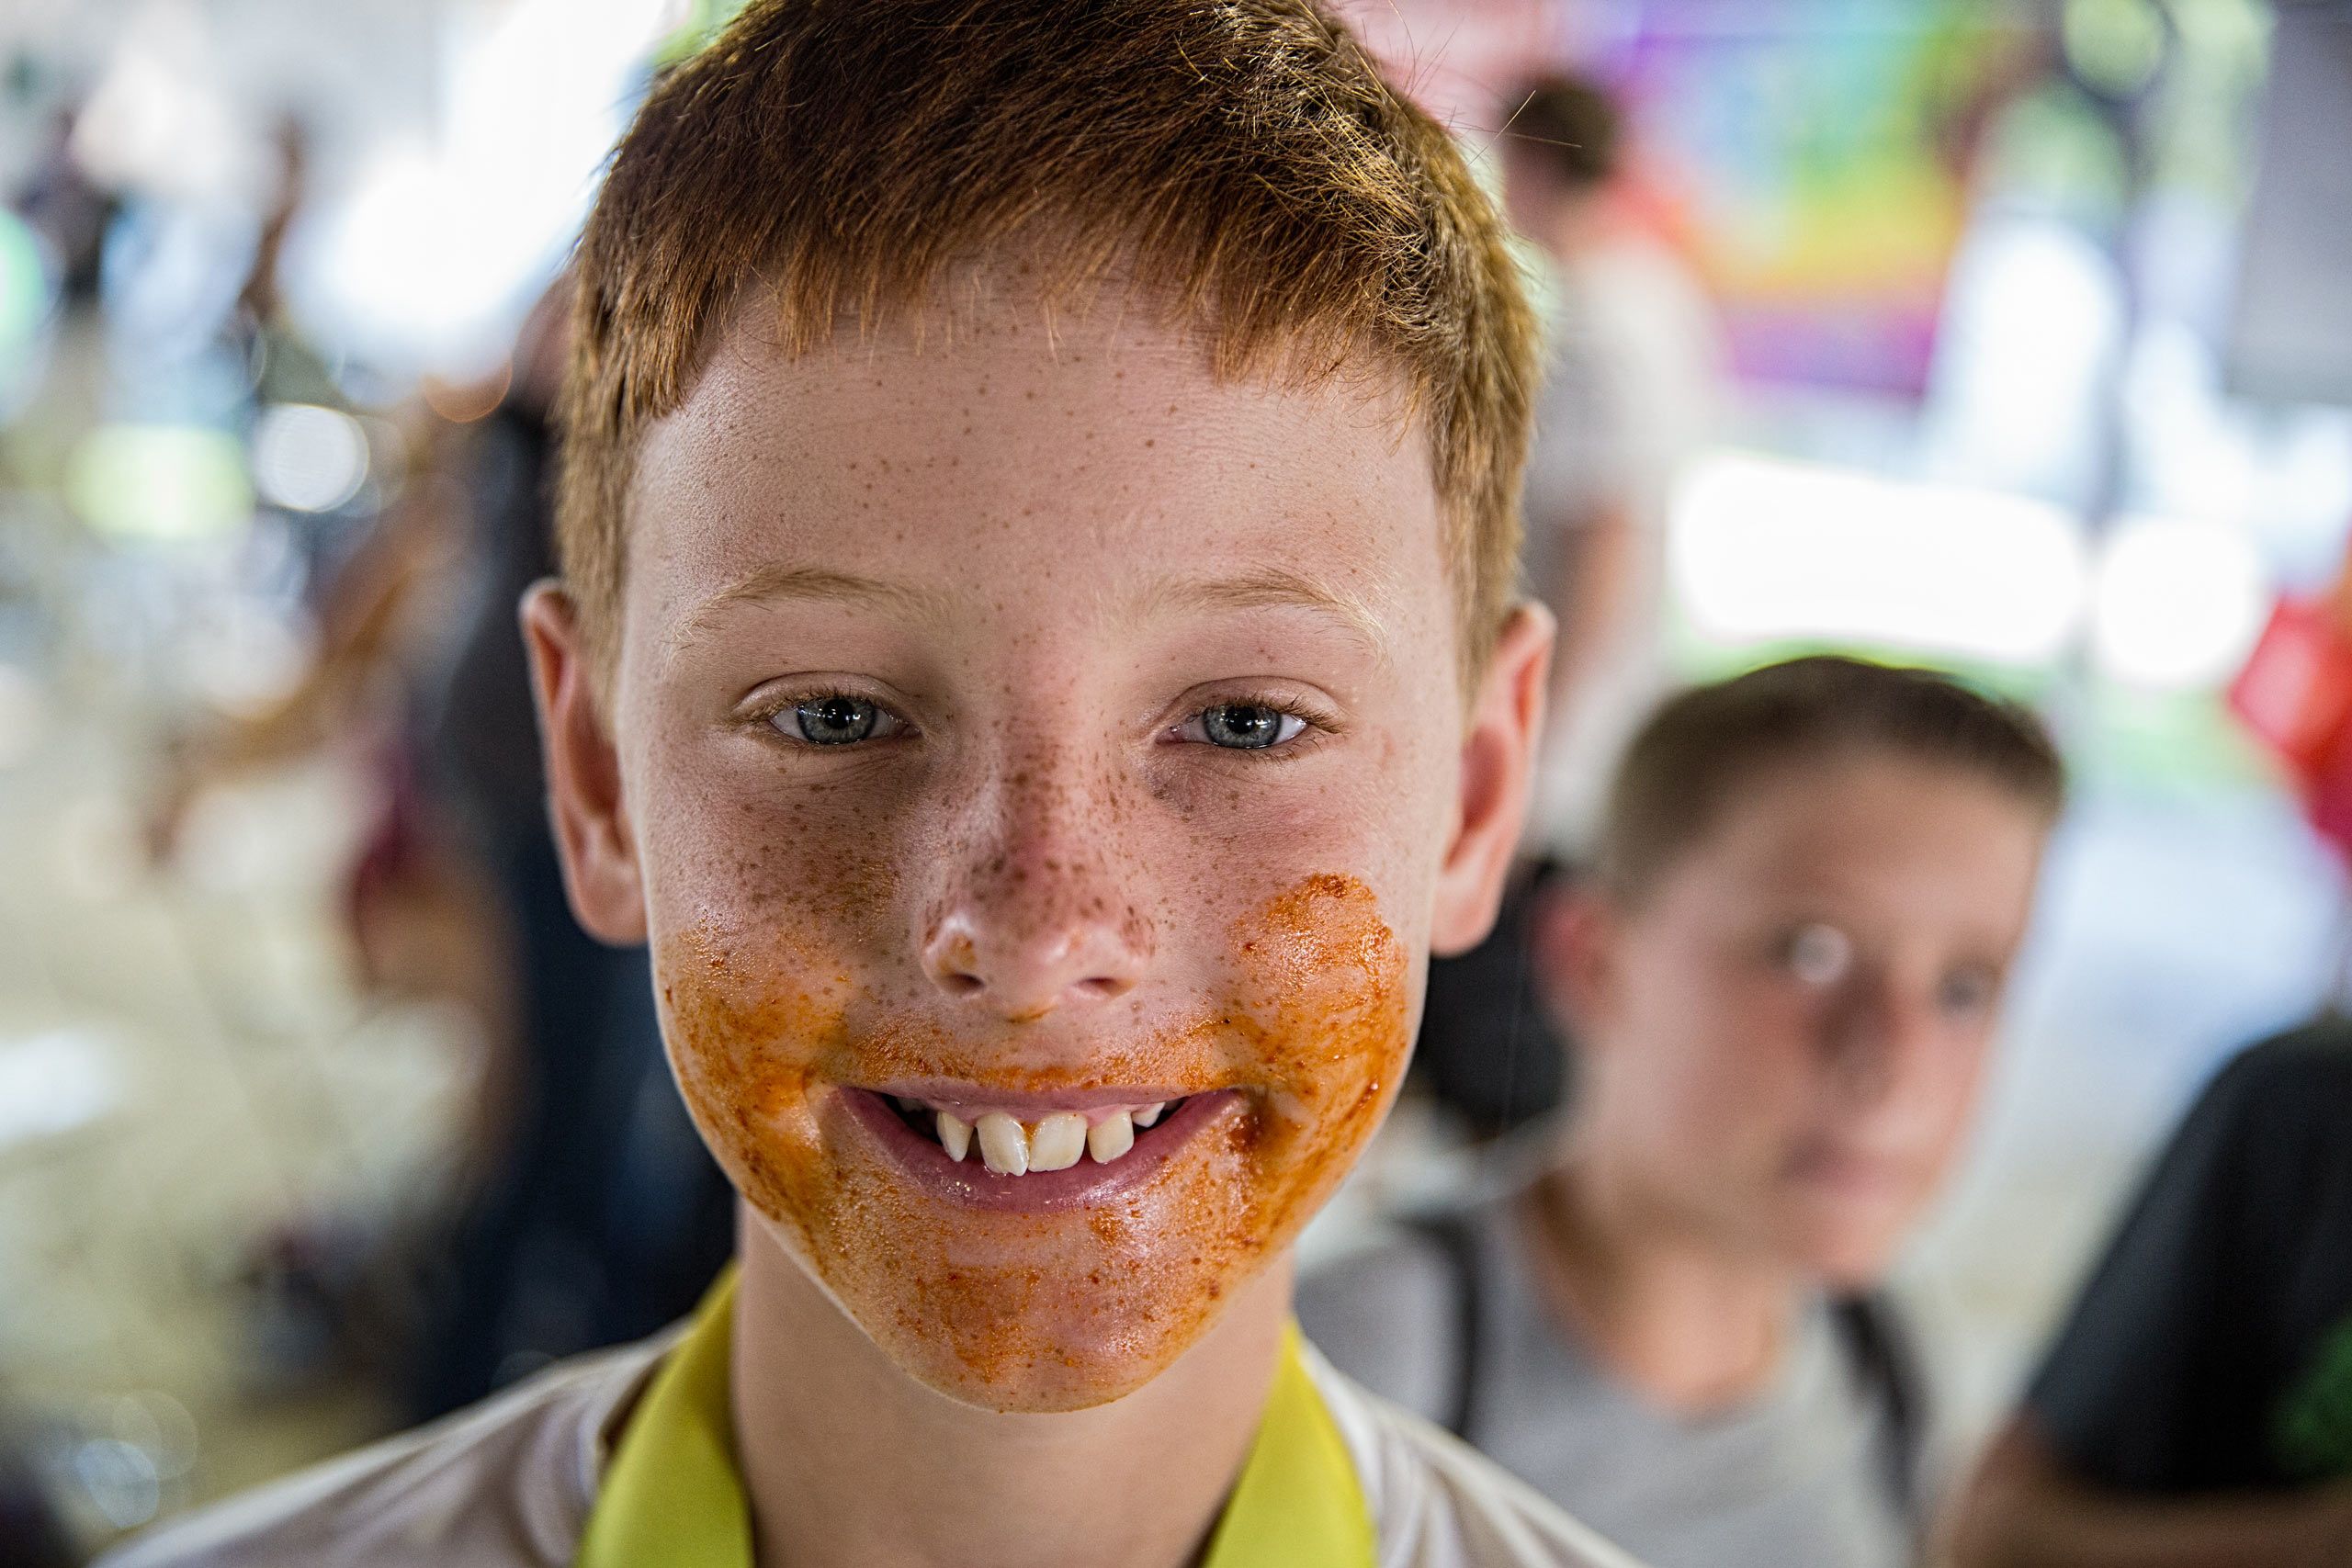 Boy With Chicken Wing Sauce On His Face After Eating Contest